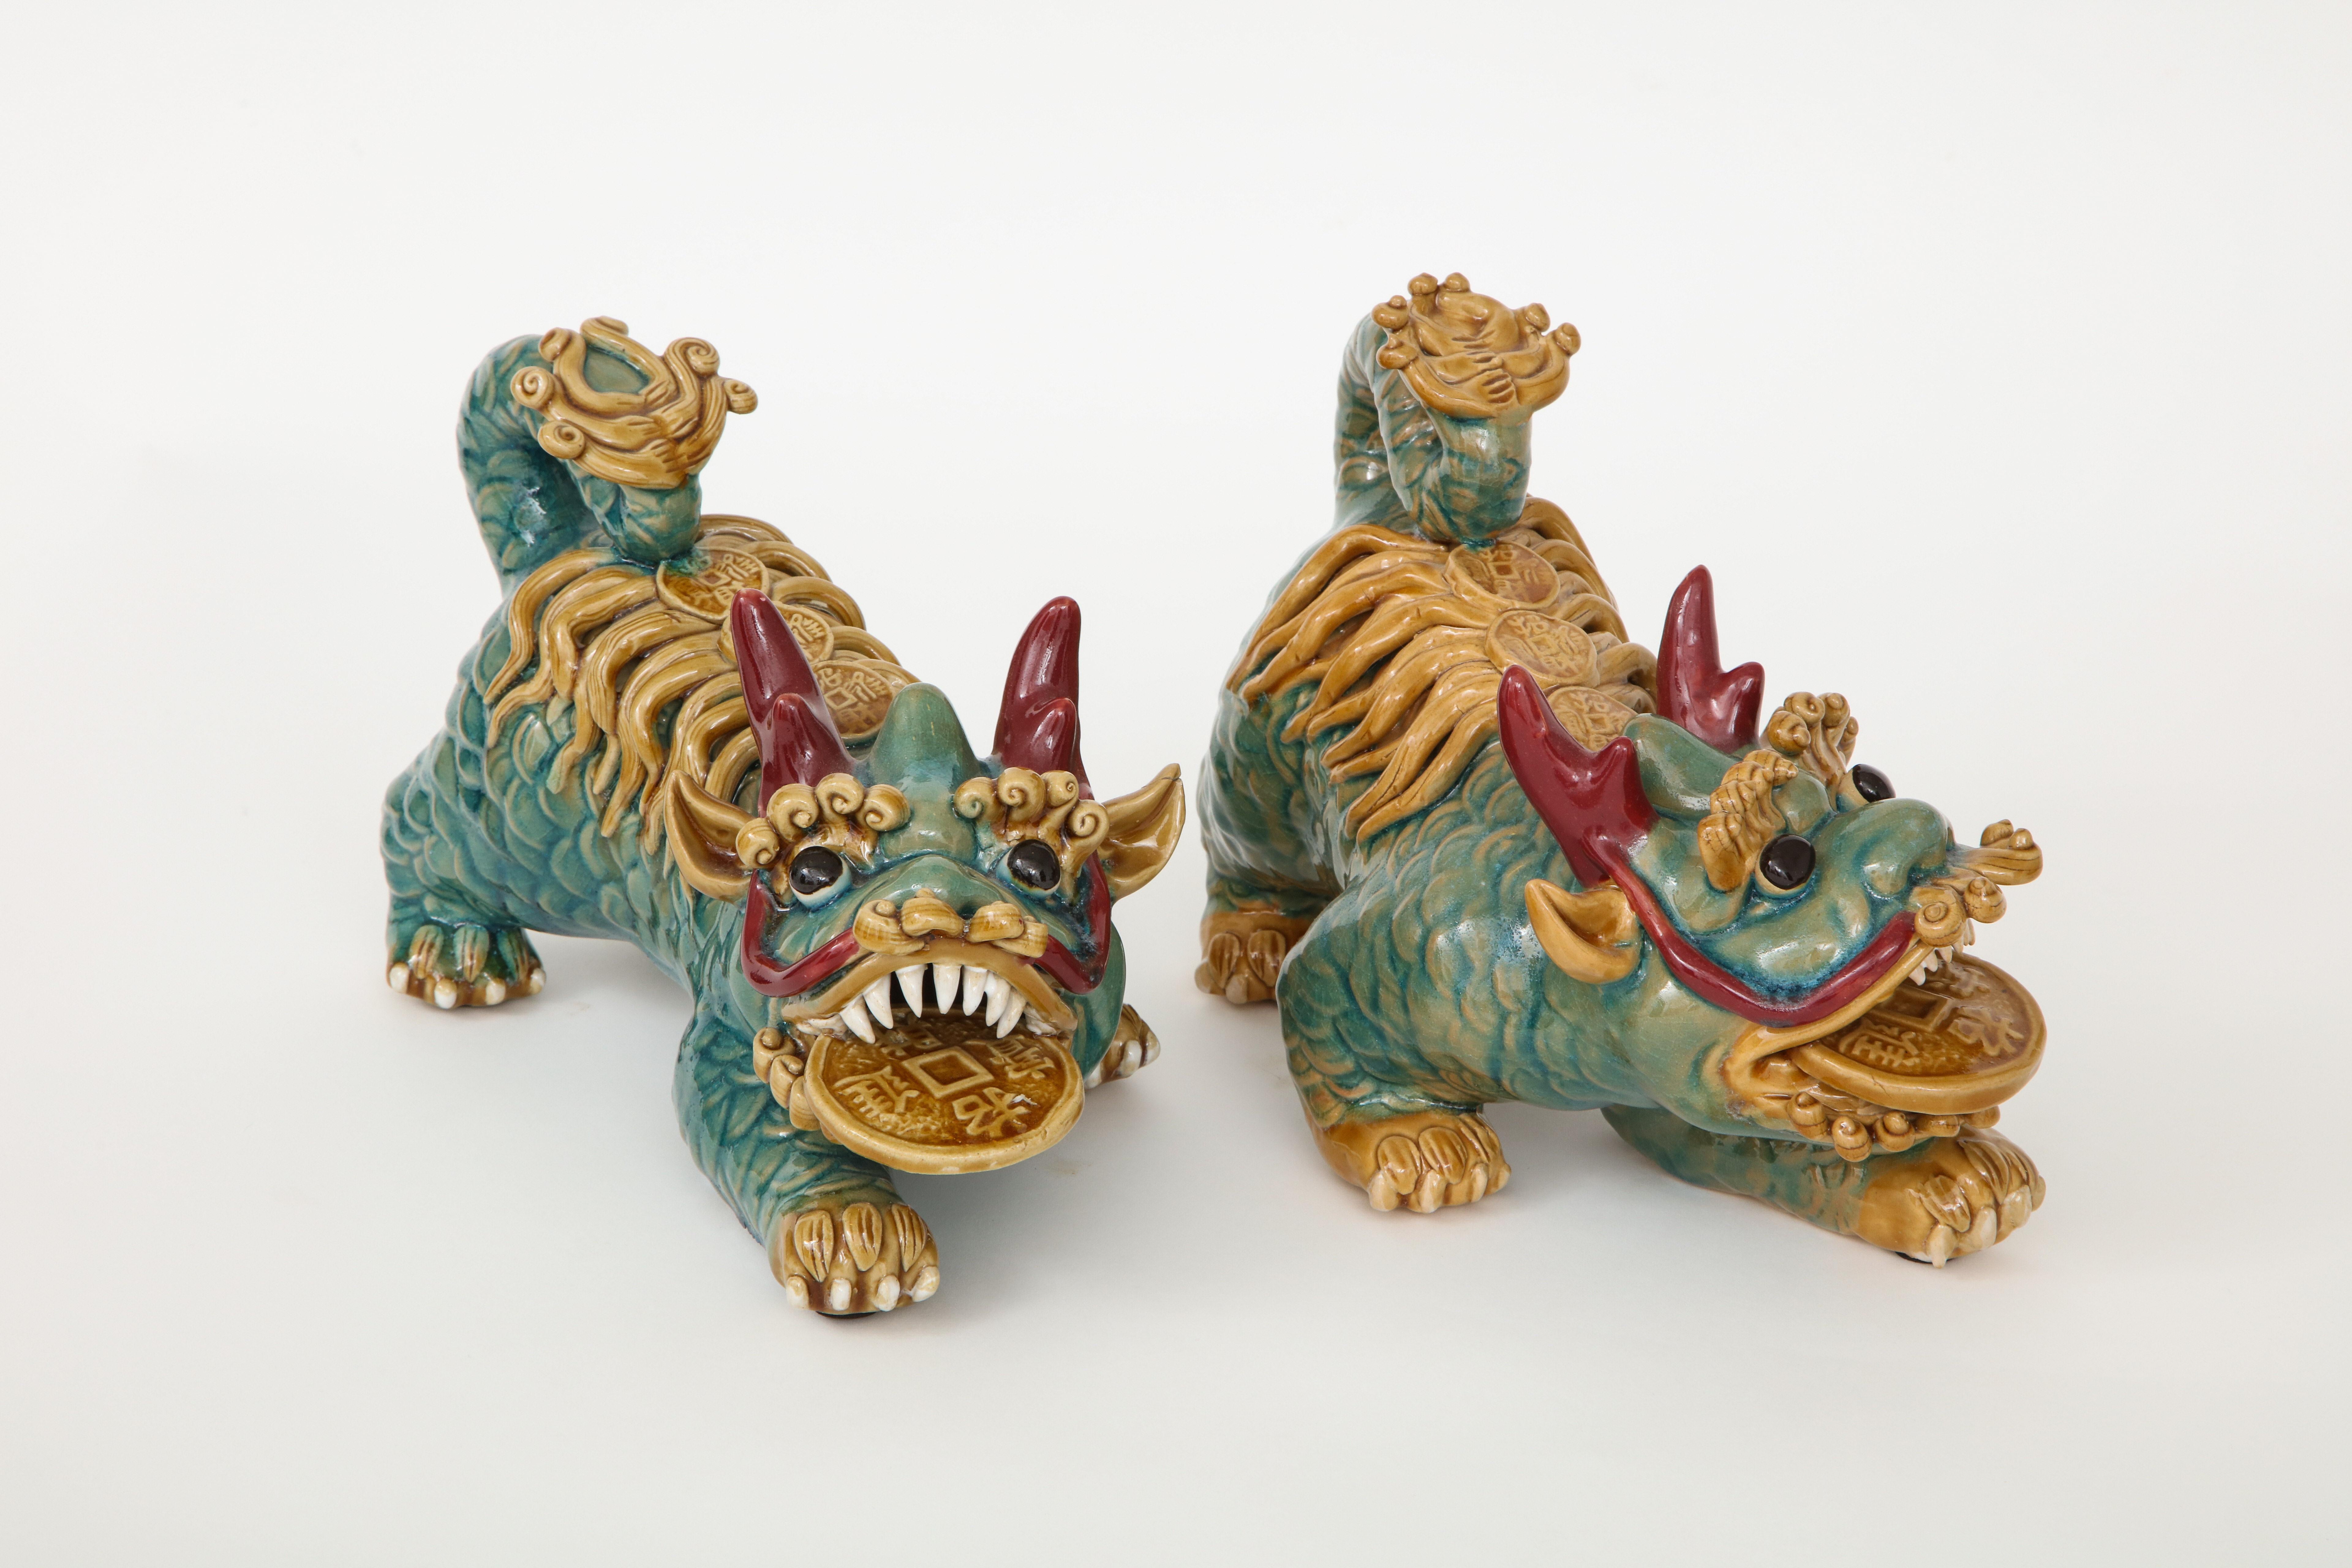 Hand-Painted Midcentury Chinese Porcelain Foo Dogs